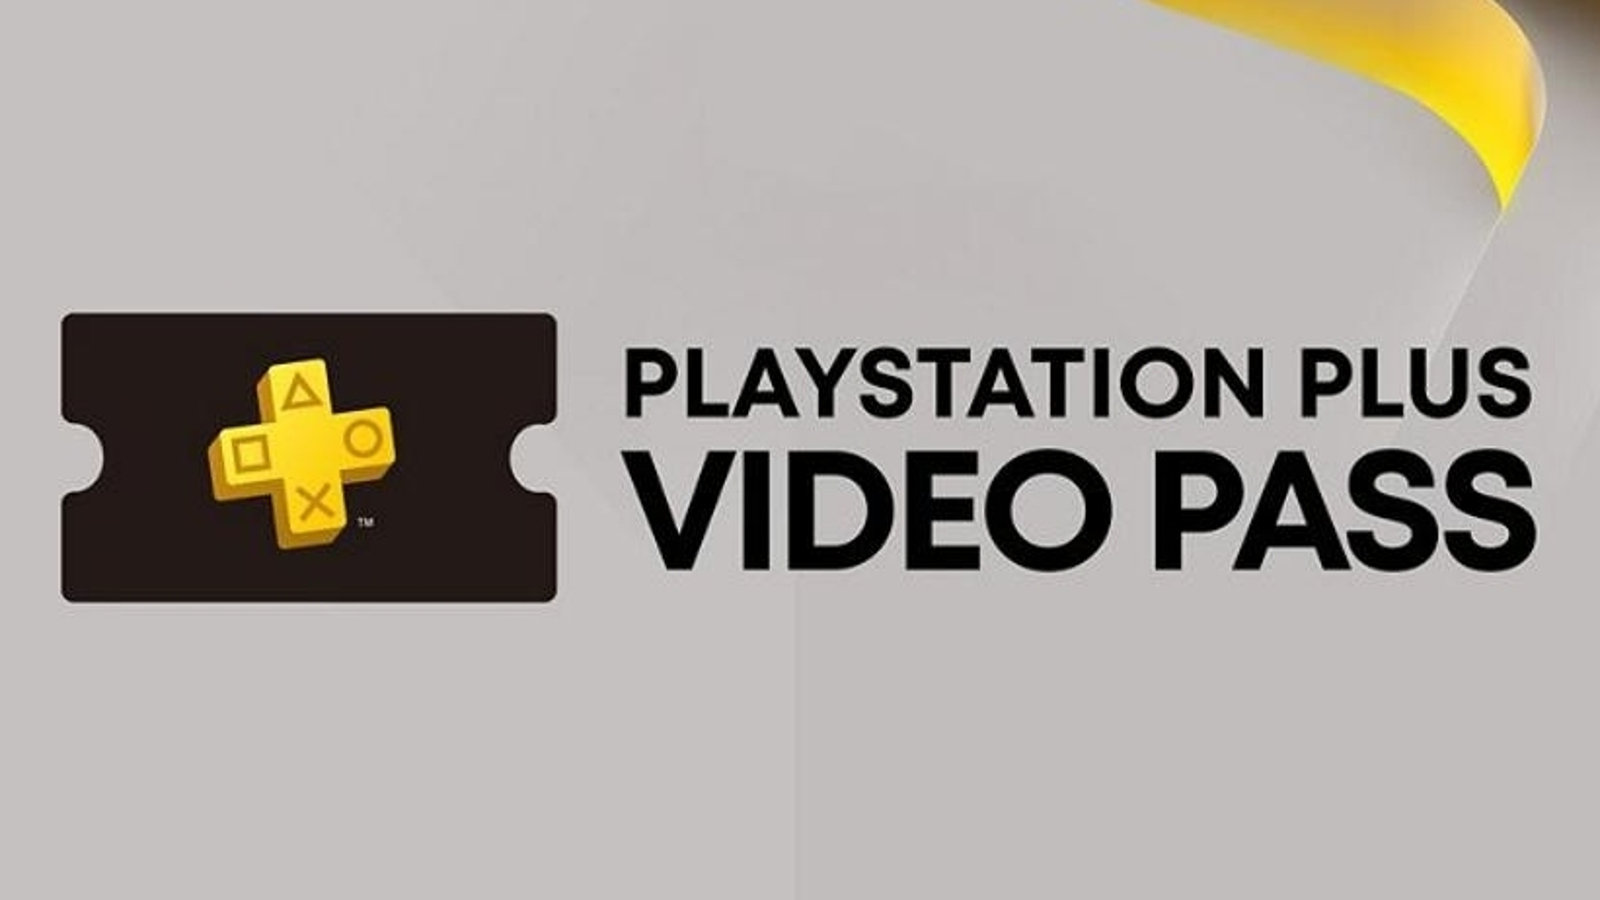 Sony rolling movies and TV shows into PlayStation Plus, but only in Poland  for now